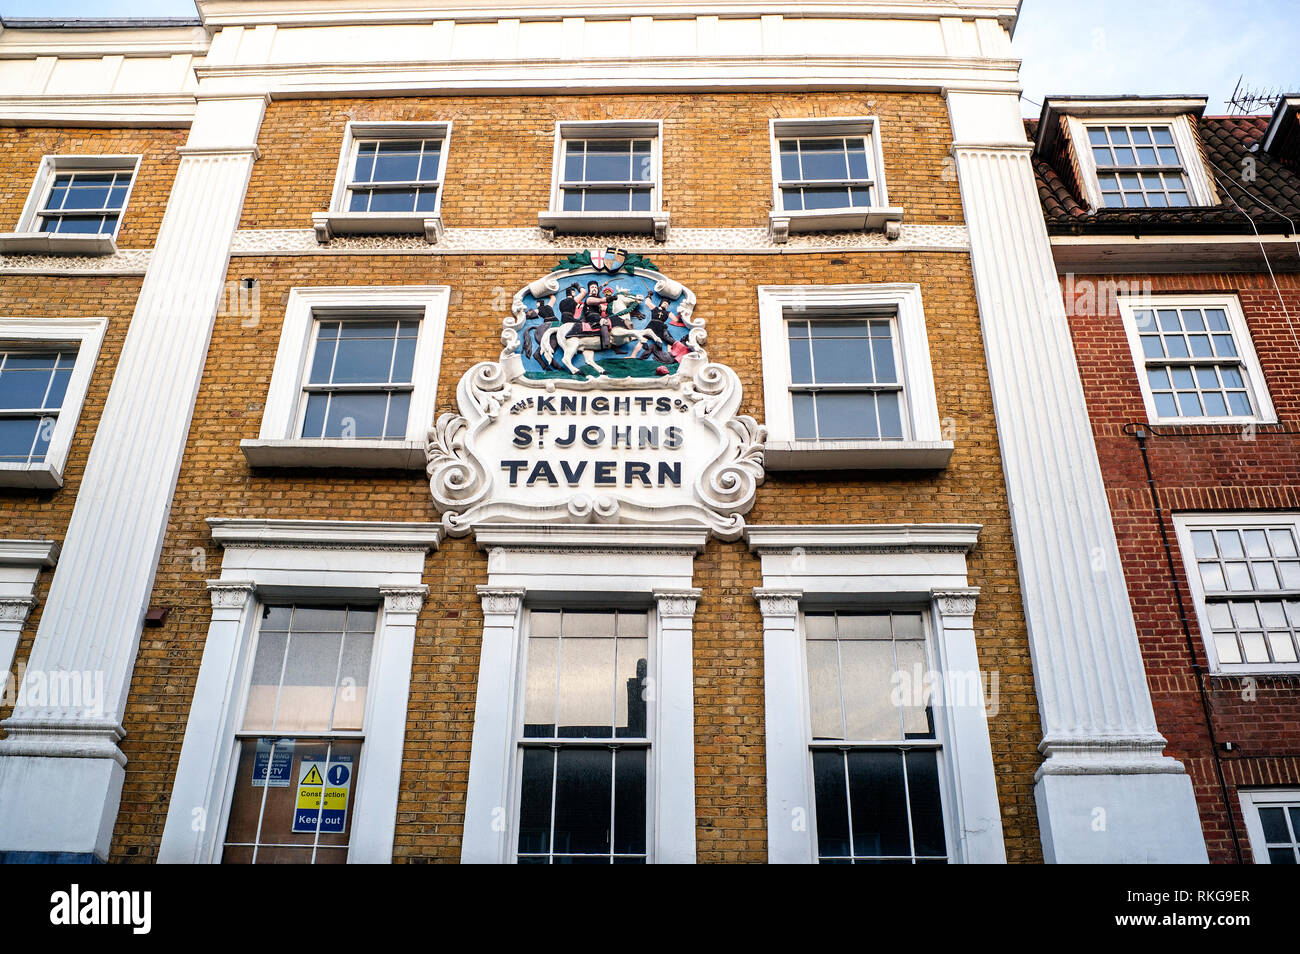 The Nights of St Johns Tavern, Queen's Terrace, St Johns Wood, Londres, Angleterre Banque D'Images